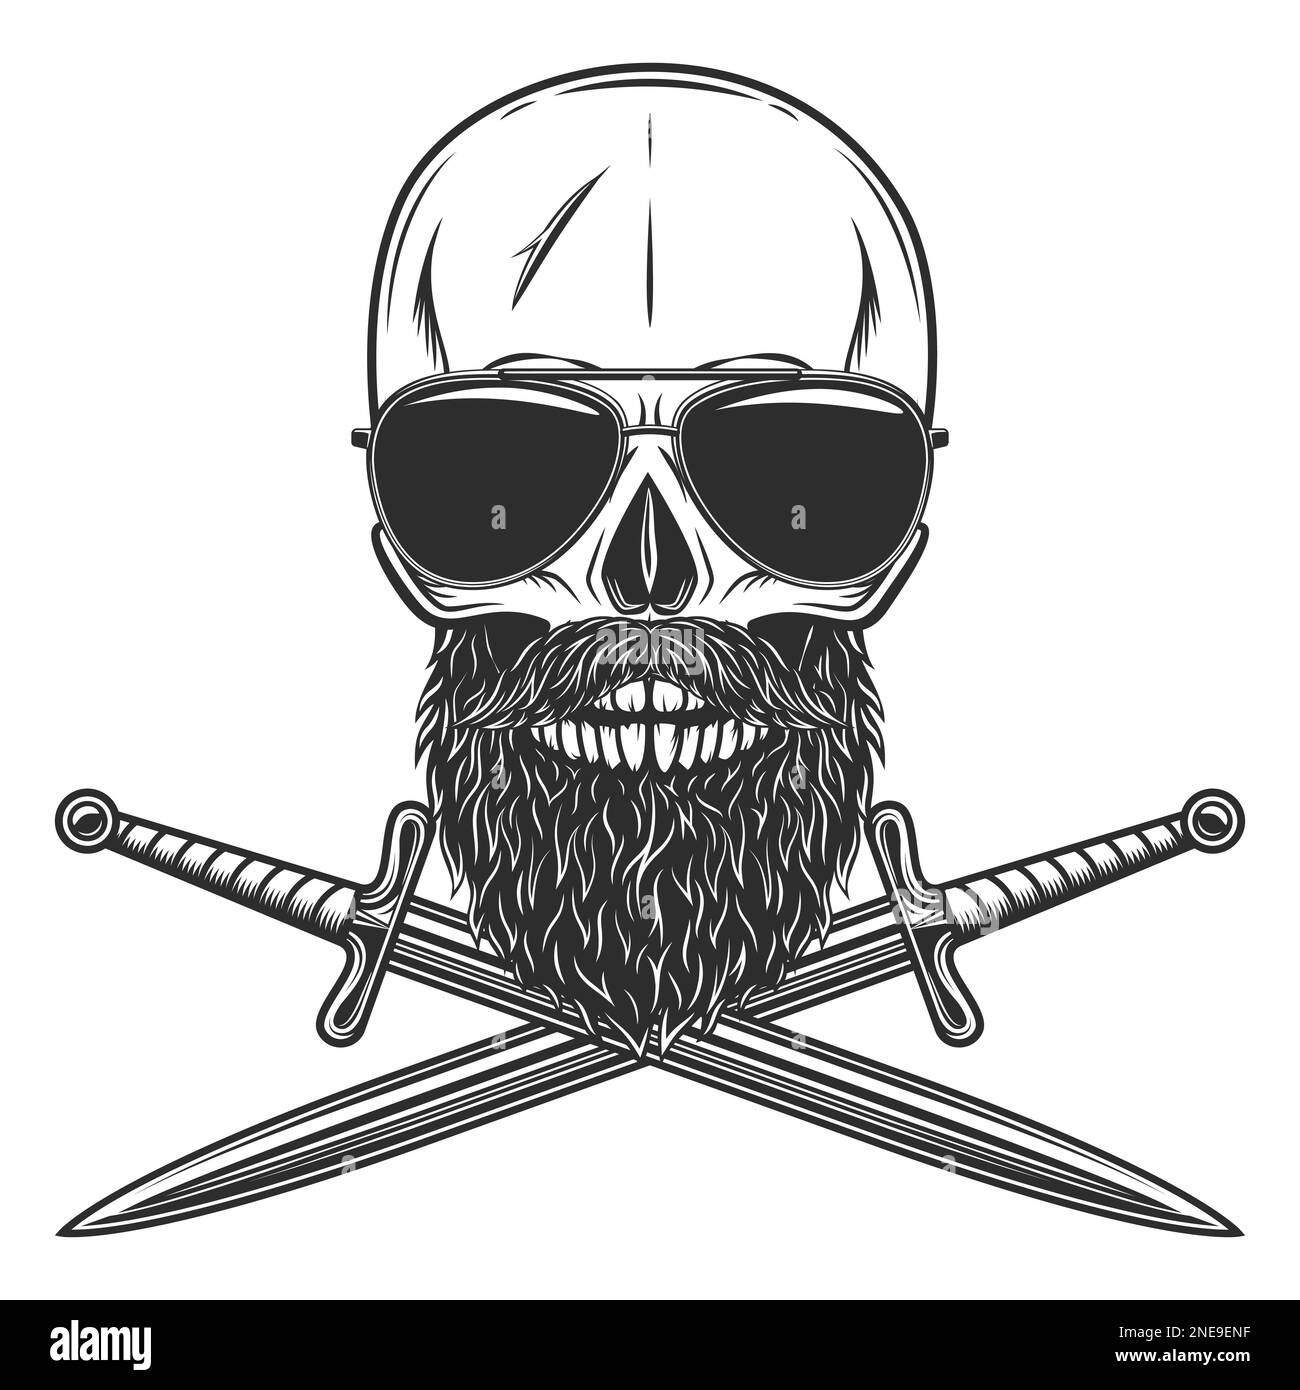 Skull in sunglasses with mustache and beard and crossed sword Isolated on white background monochrome illustration Stock Photo